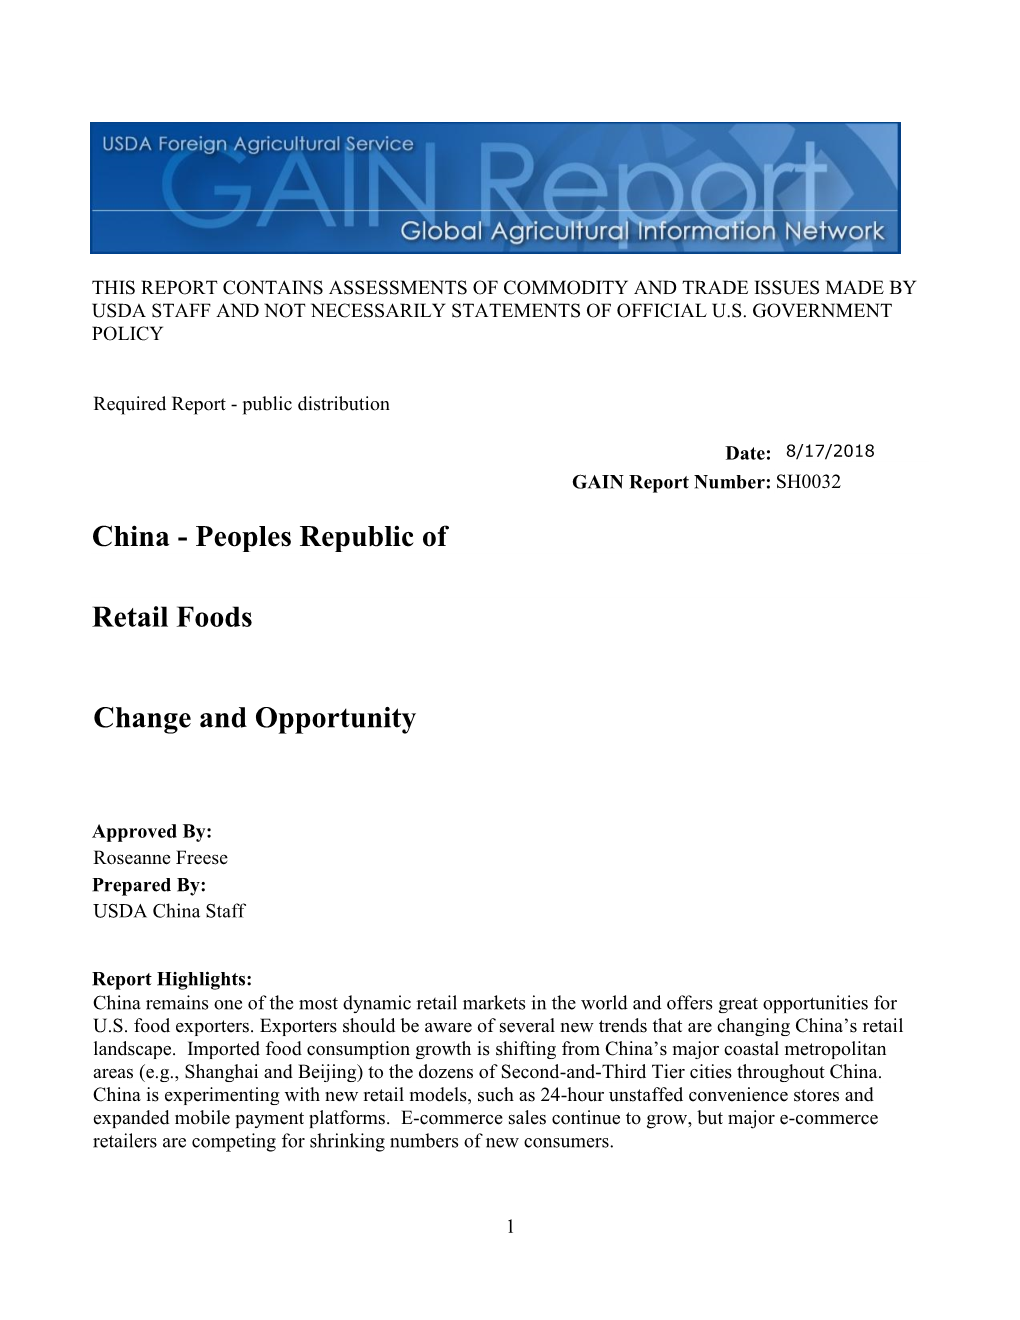 Change and Opportunity Retail Foods China